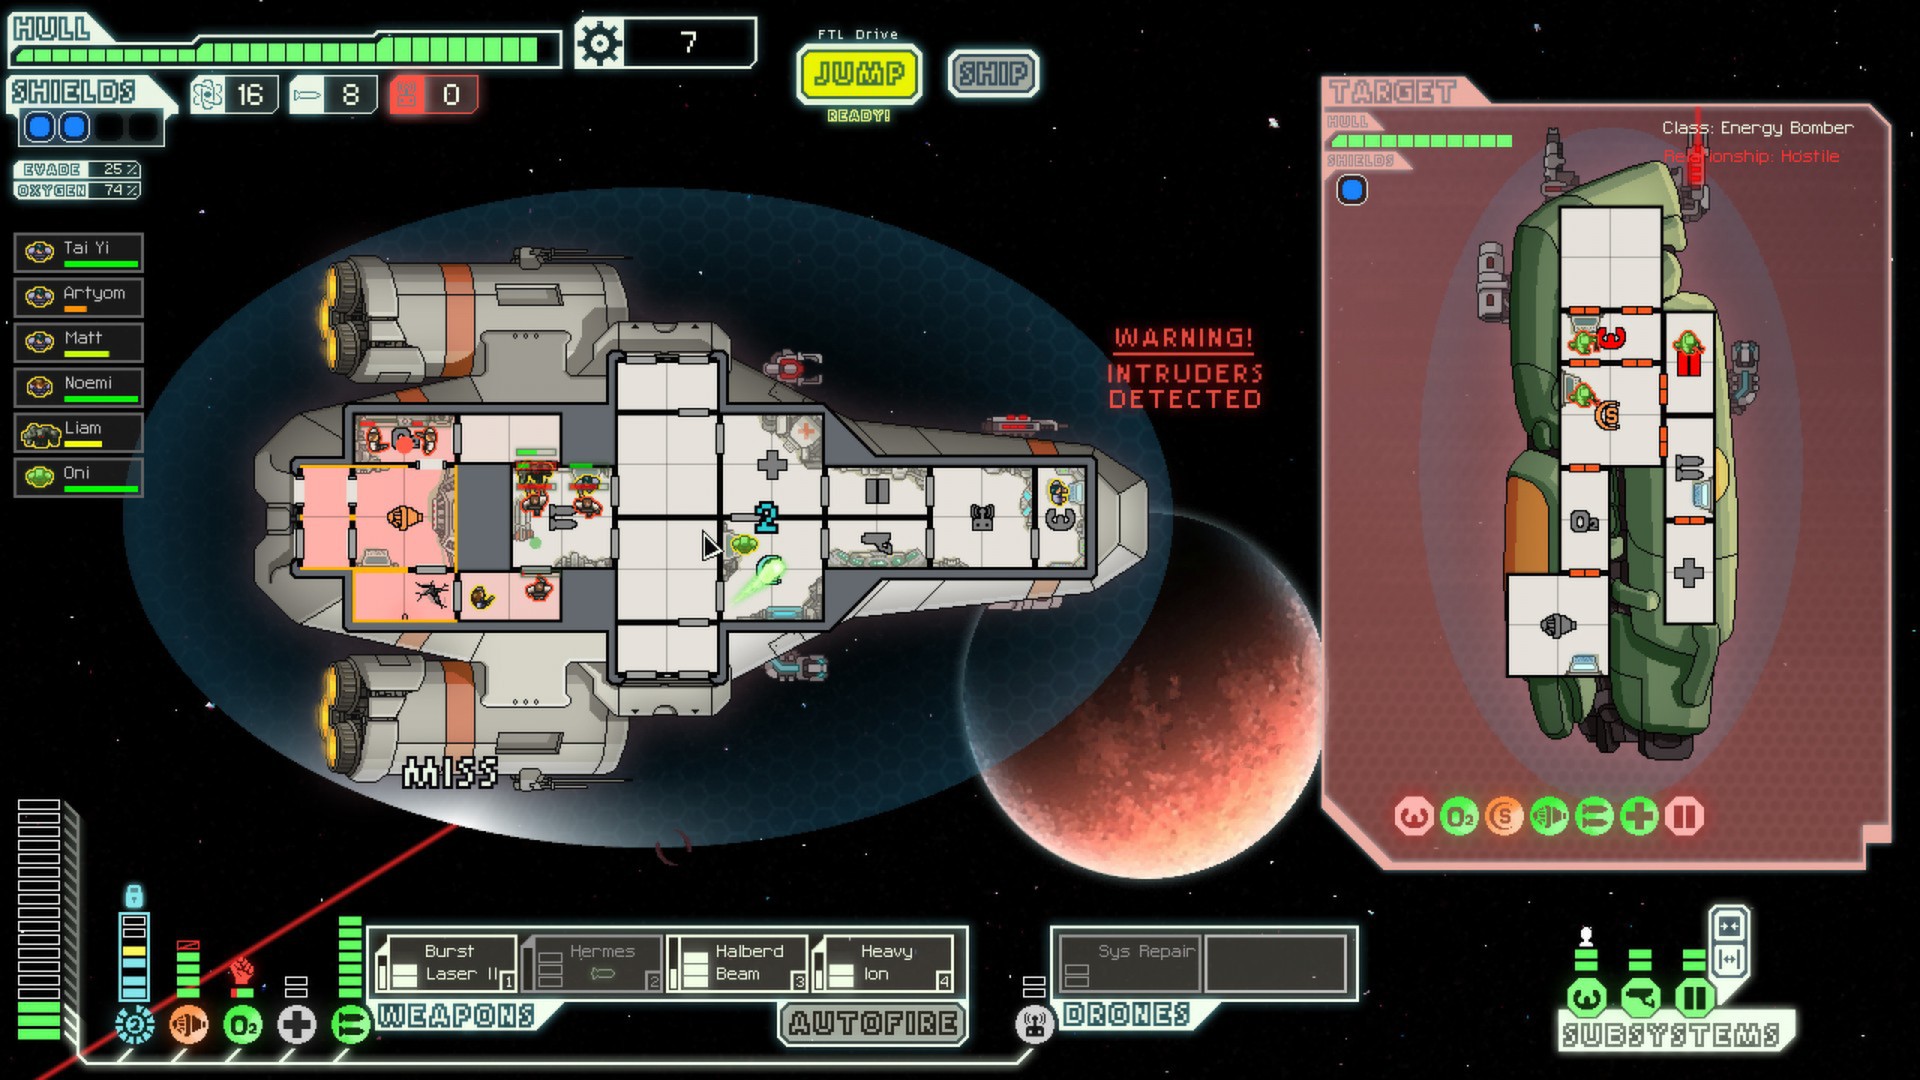 roguelike video games - FTL: Faster Than Light video game screenshot